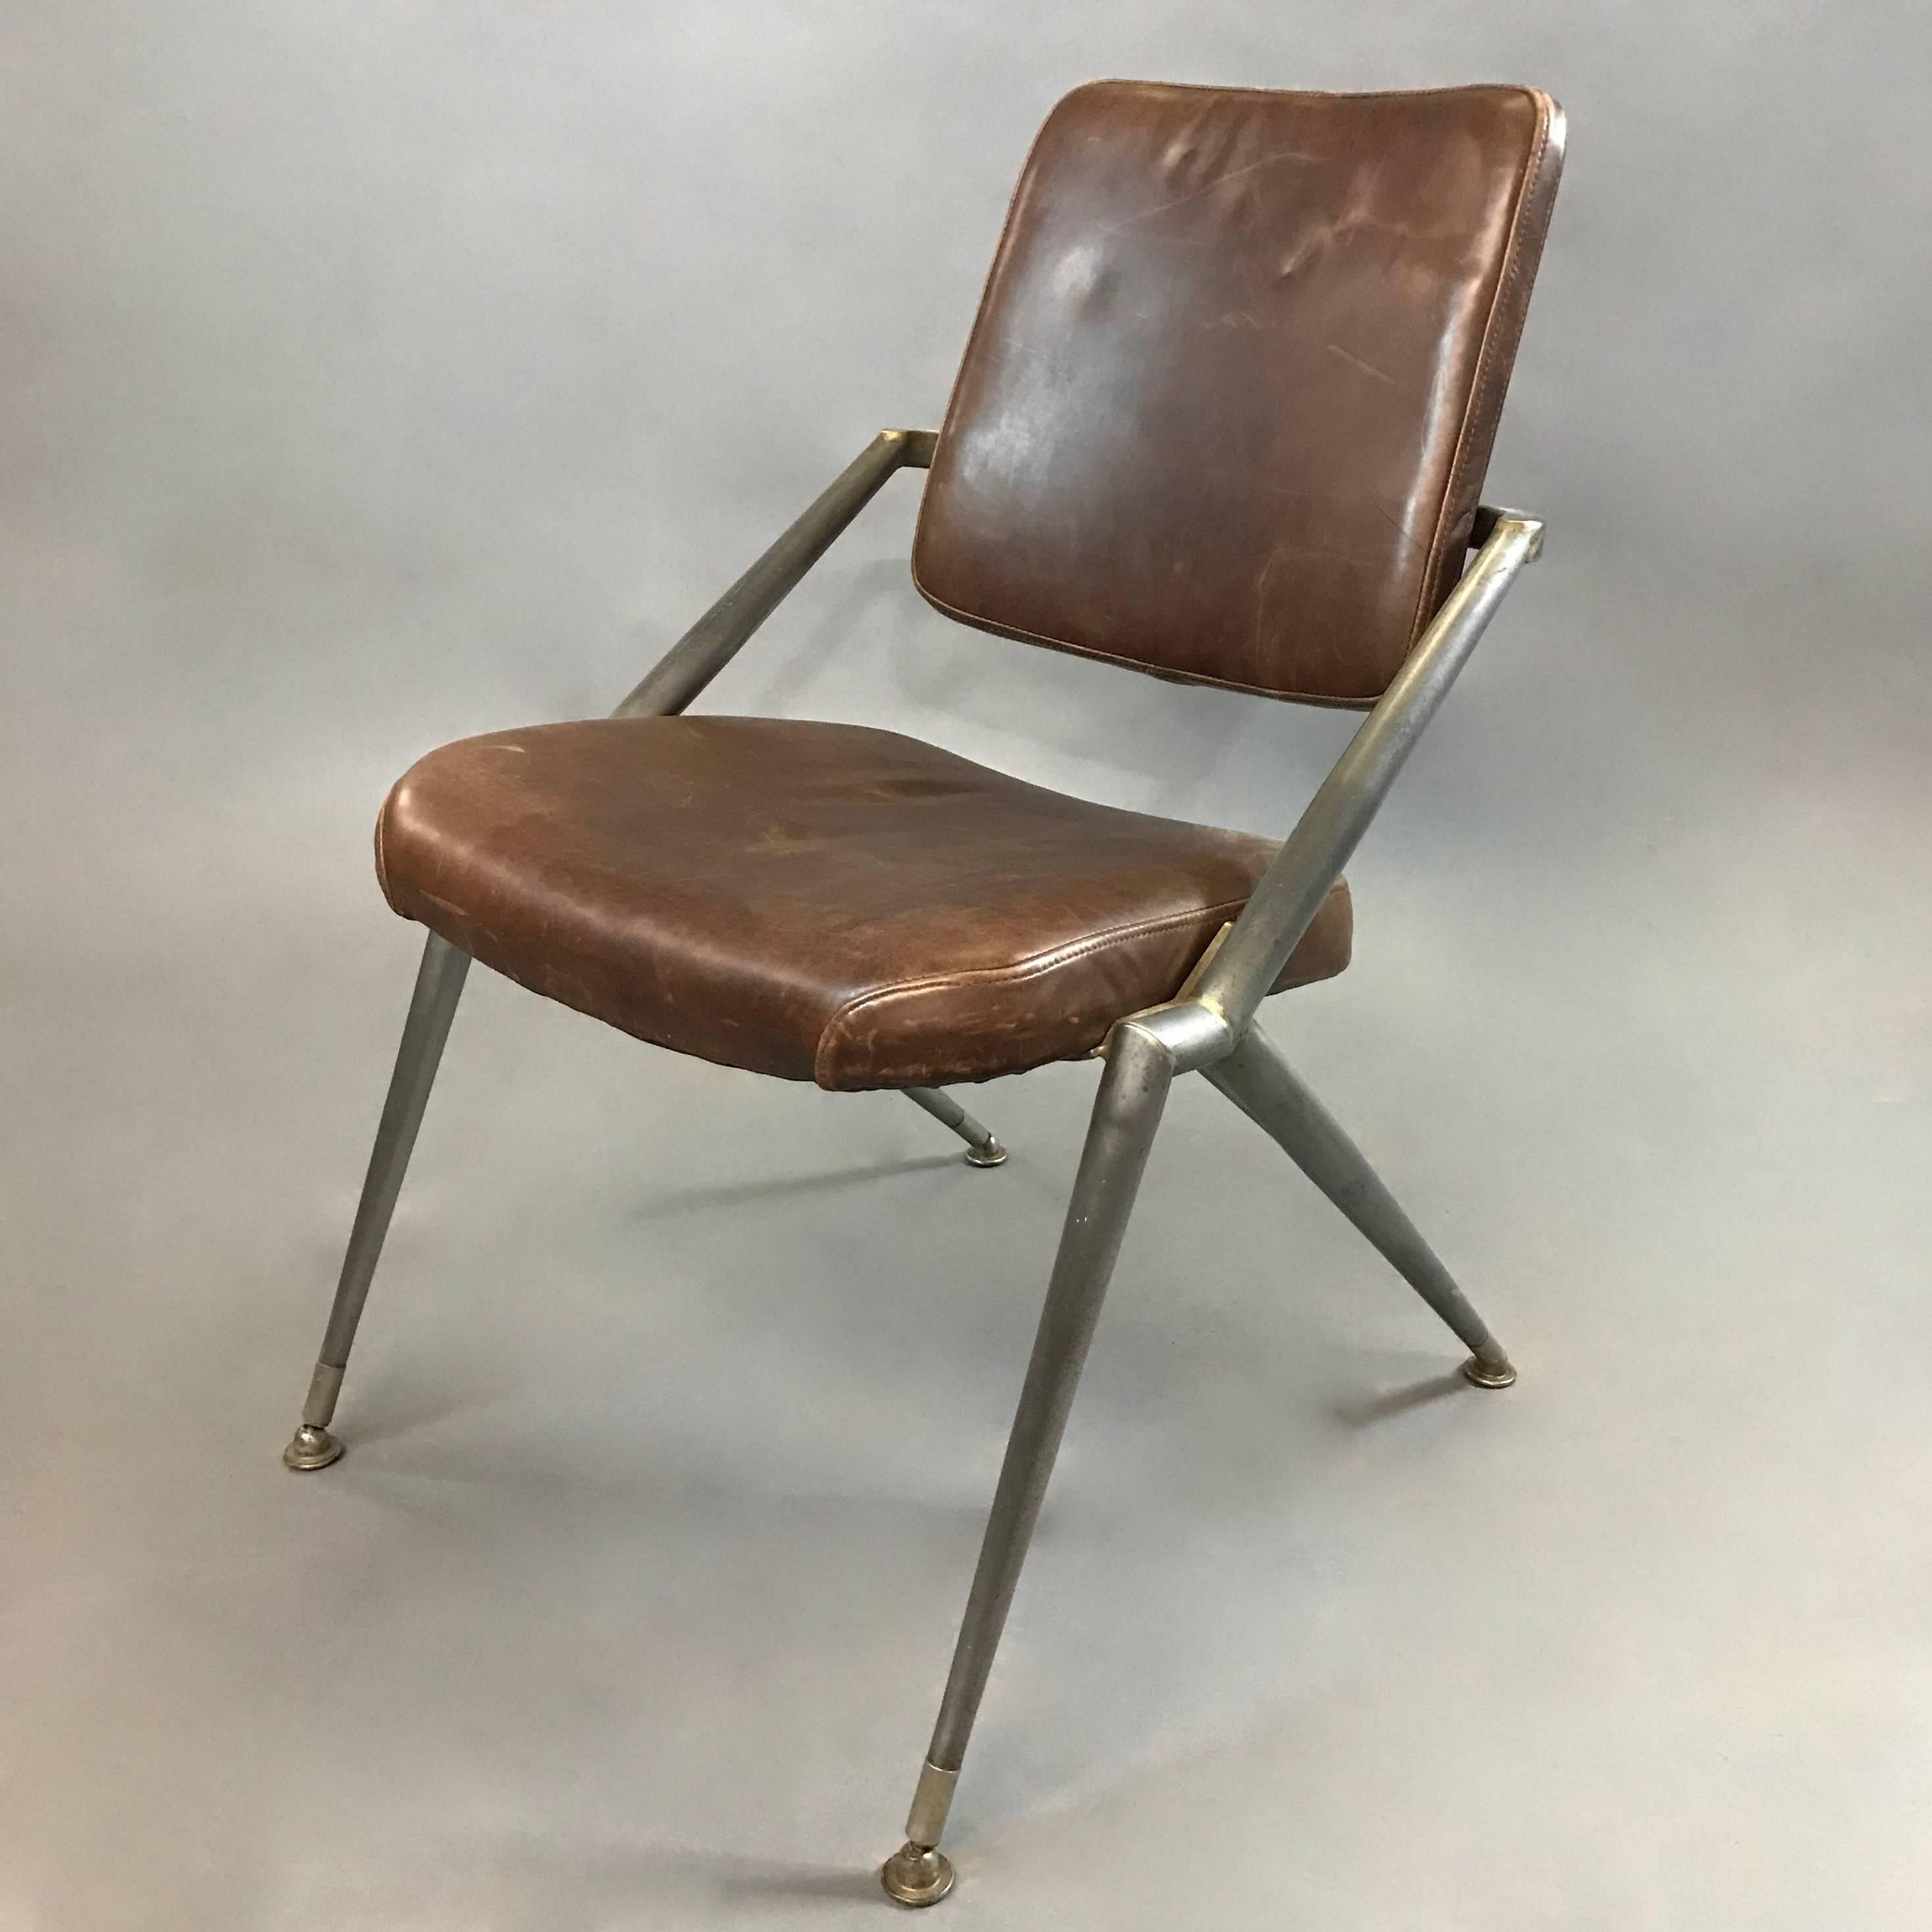 Prototype, Mid-Century Modern, office, desk chair by Cramer features a stylized steel frame with newly upholstered, luggage leather seat and back. This prototype is institutional midcentury at it's finest.